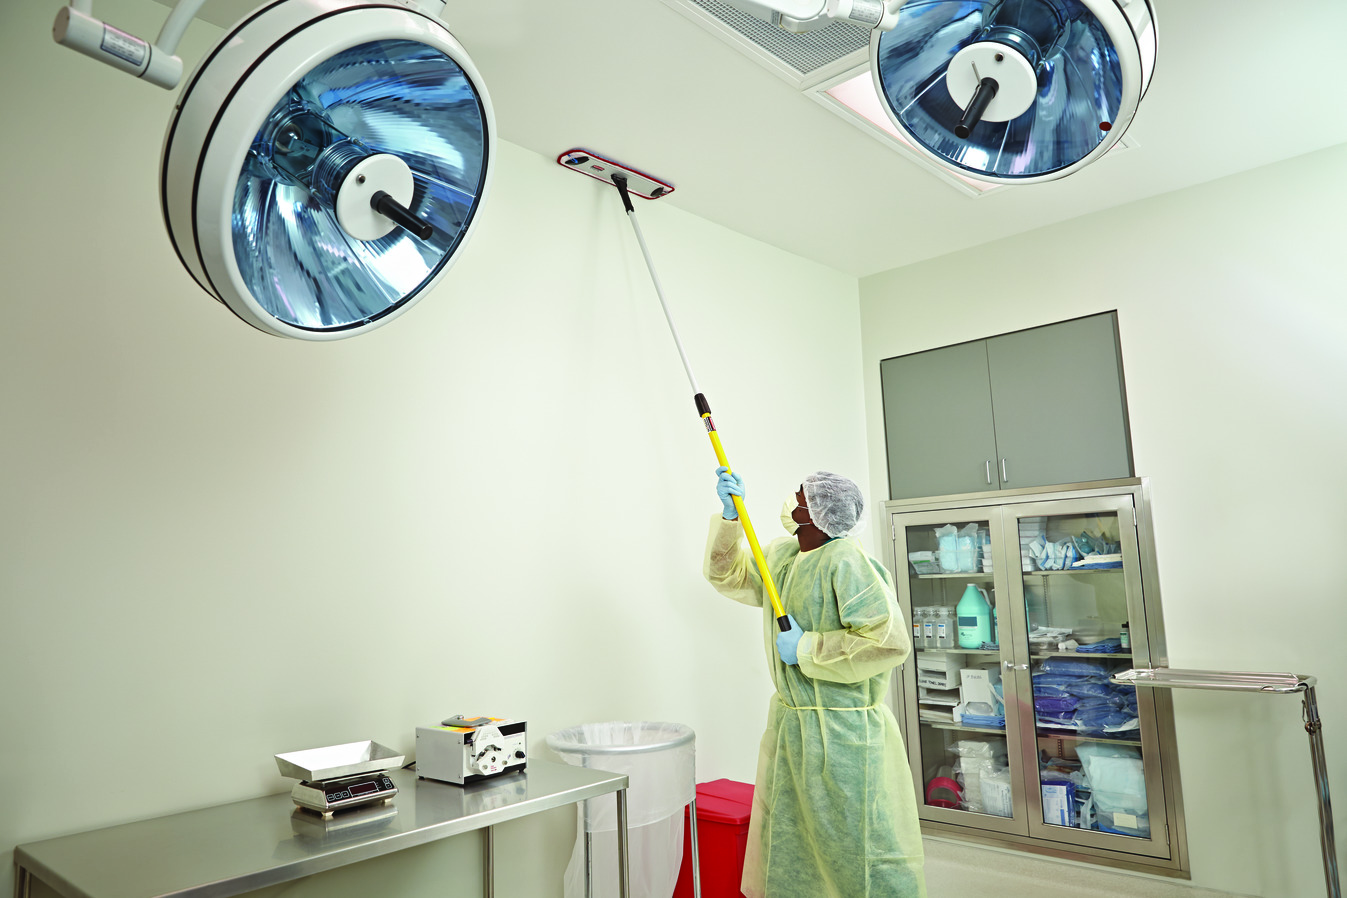 https://www.rubbermaidcommercial.com.au/media/5897/fgq56000yl00-cleaning-quickconnectframe-18in-yellow-in-use-operatingroom-walls-2_1.jpg